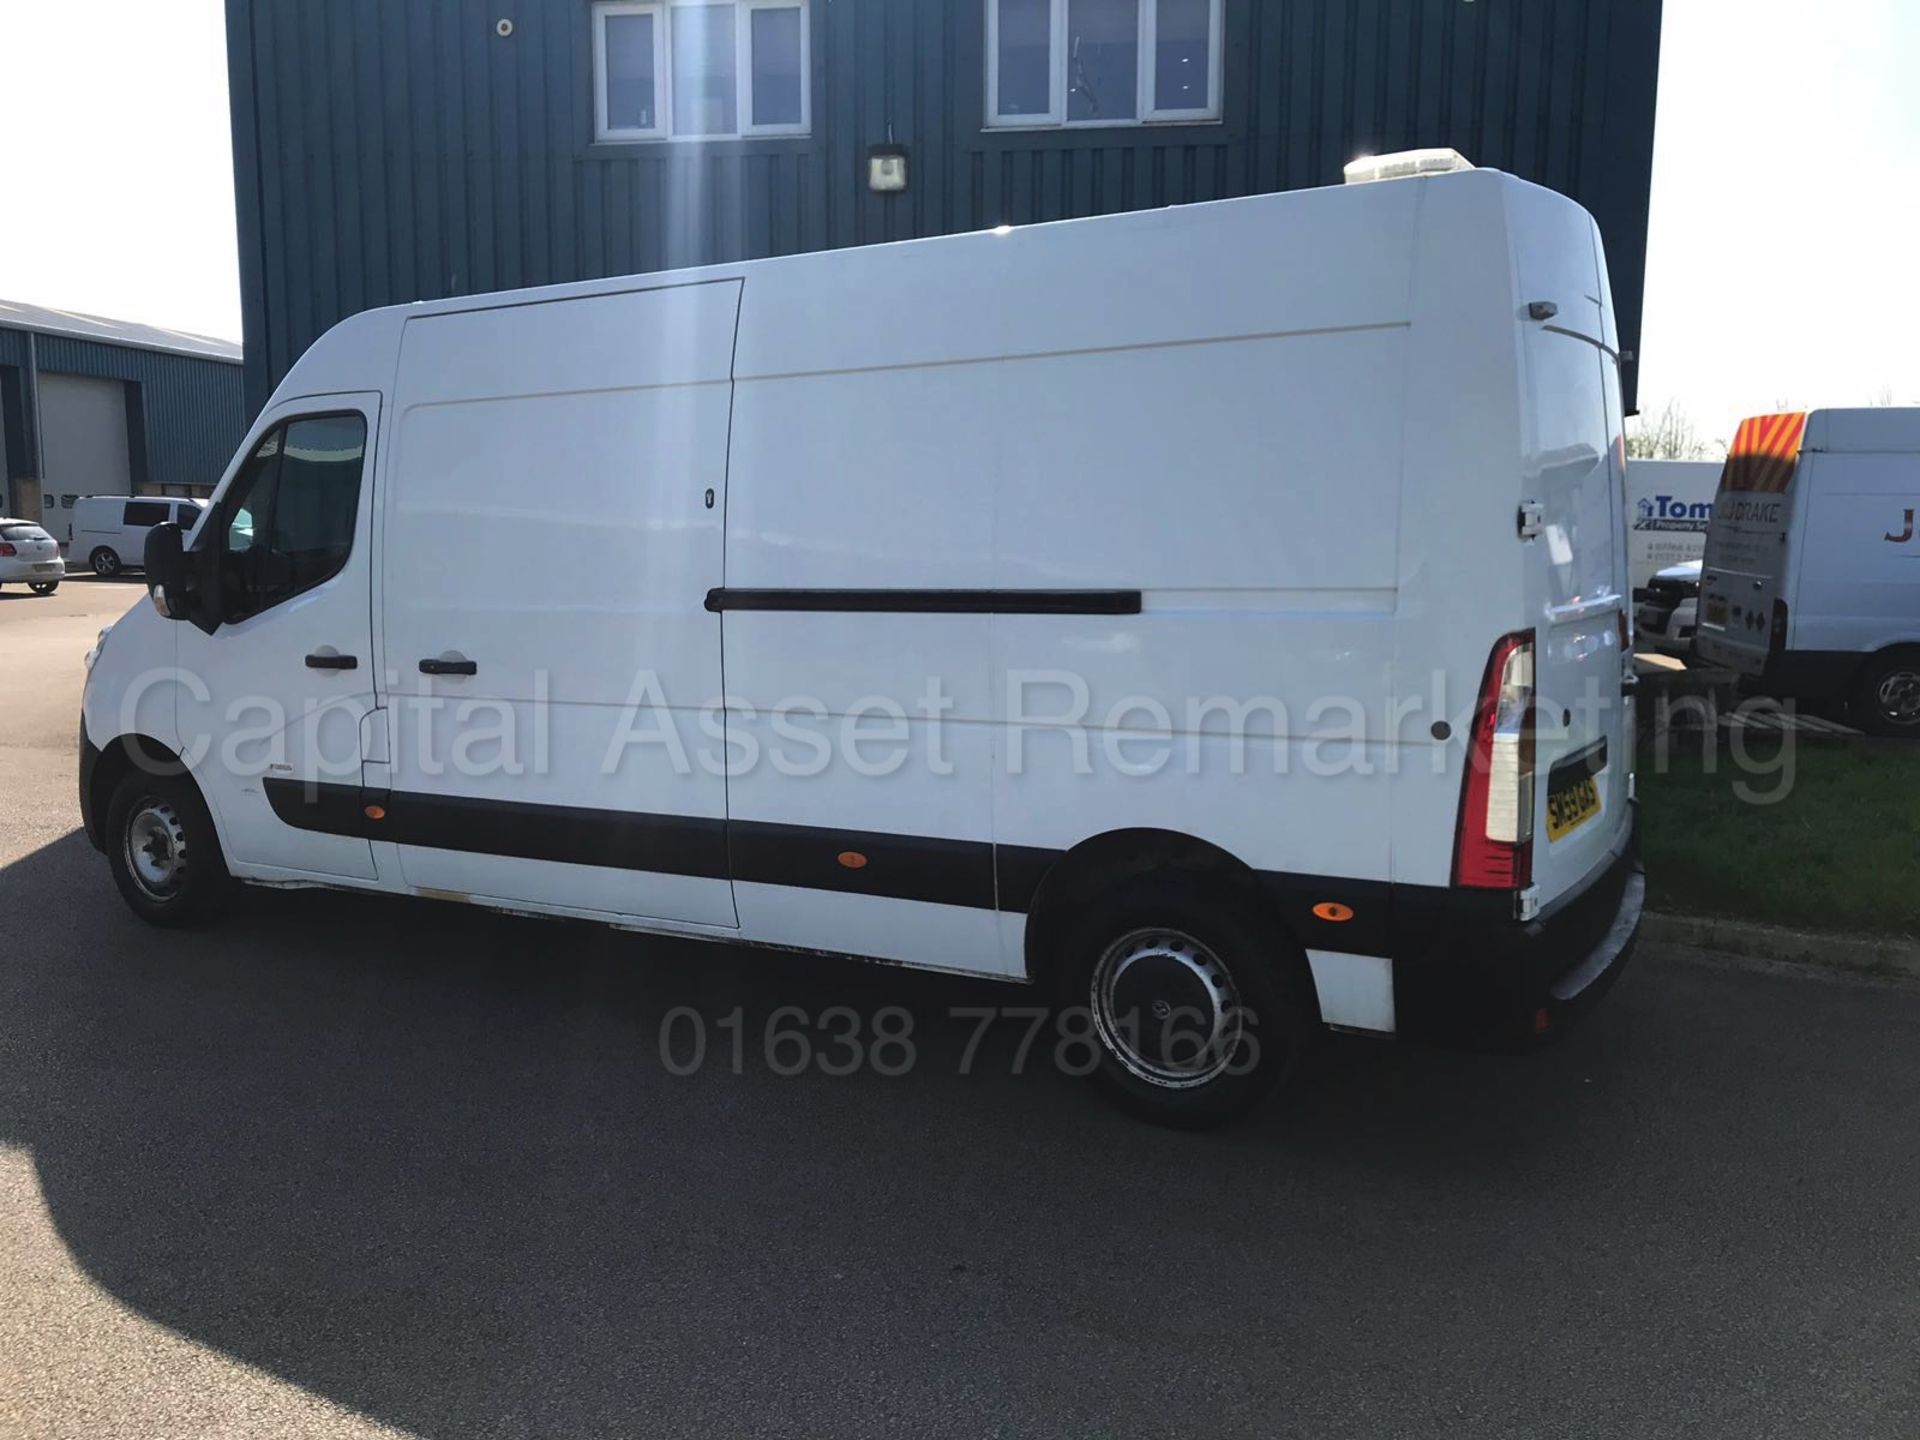 (On Sale) VAUXHALL MOVANO F3500 'LWB HI-ROOF' (2013 MODEL) '2.3 CDTI - 125 BHP - 6 SPEED' *AIR CON* - Image 6 of 21